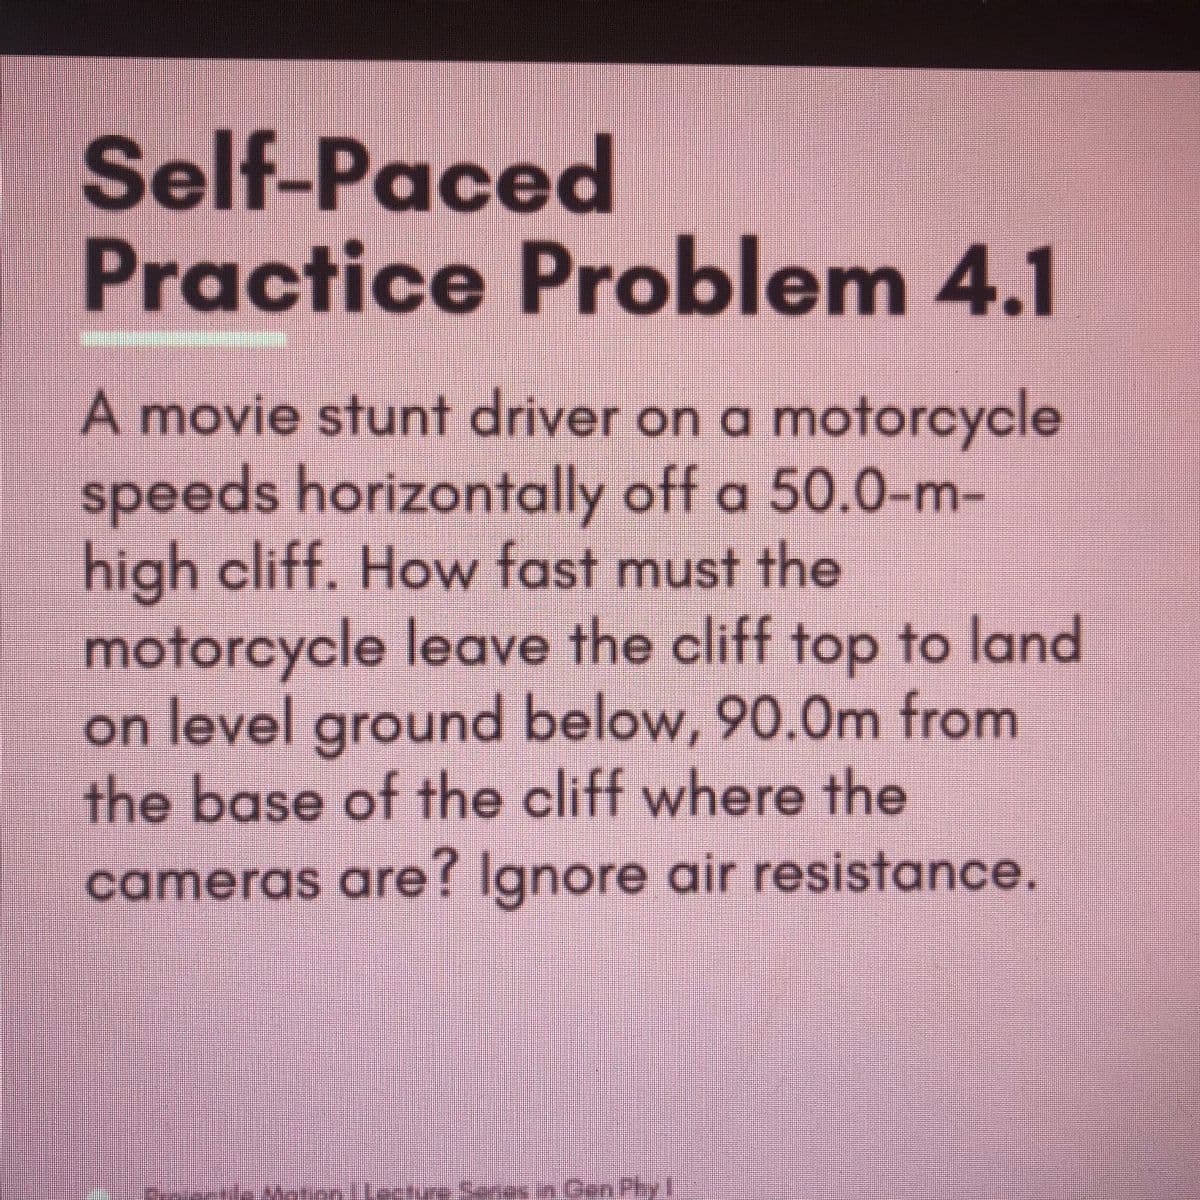 Self-Paced
Practice Problem 4.1
A movie stunt driver on a motorcycle
speeds horizontally off a 50.0-m-
high cliff. How fast must the
motorcycle leave the cliff top to land
on level ground below, 90.0m from
the base of the cliff where the
cameras are? Ignore air resistance.
Senes in Gen Phy l
